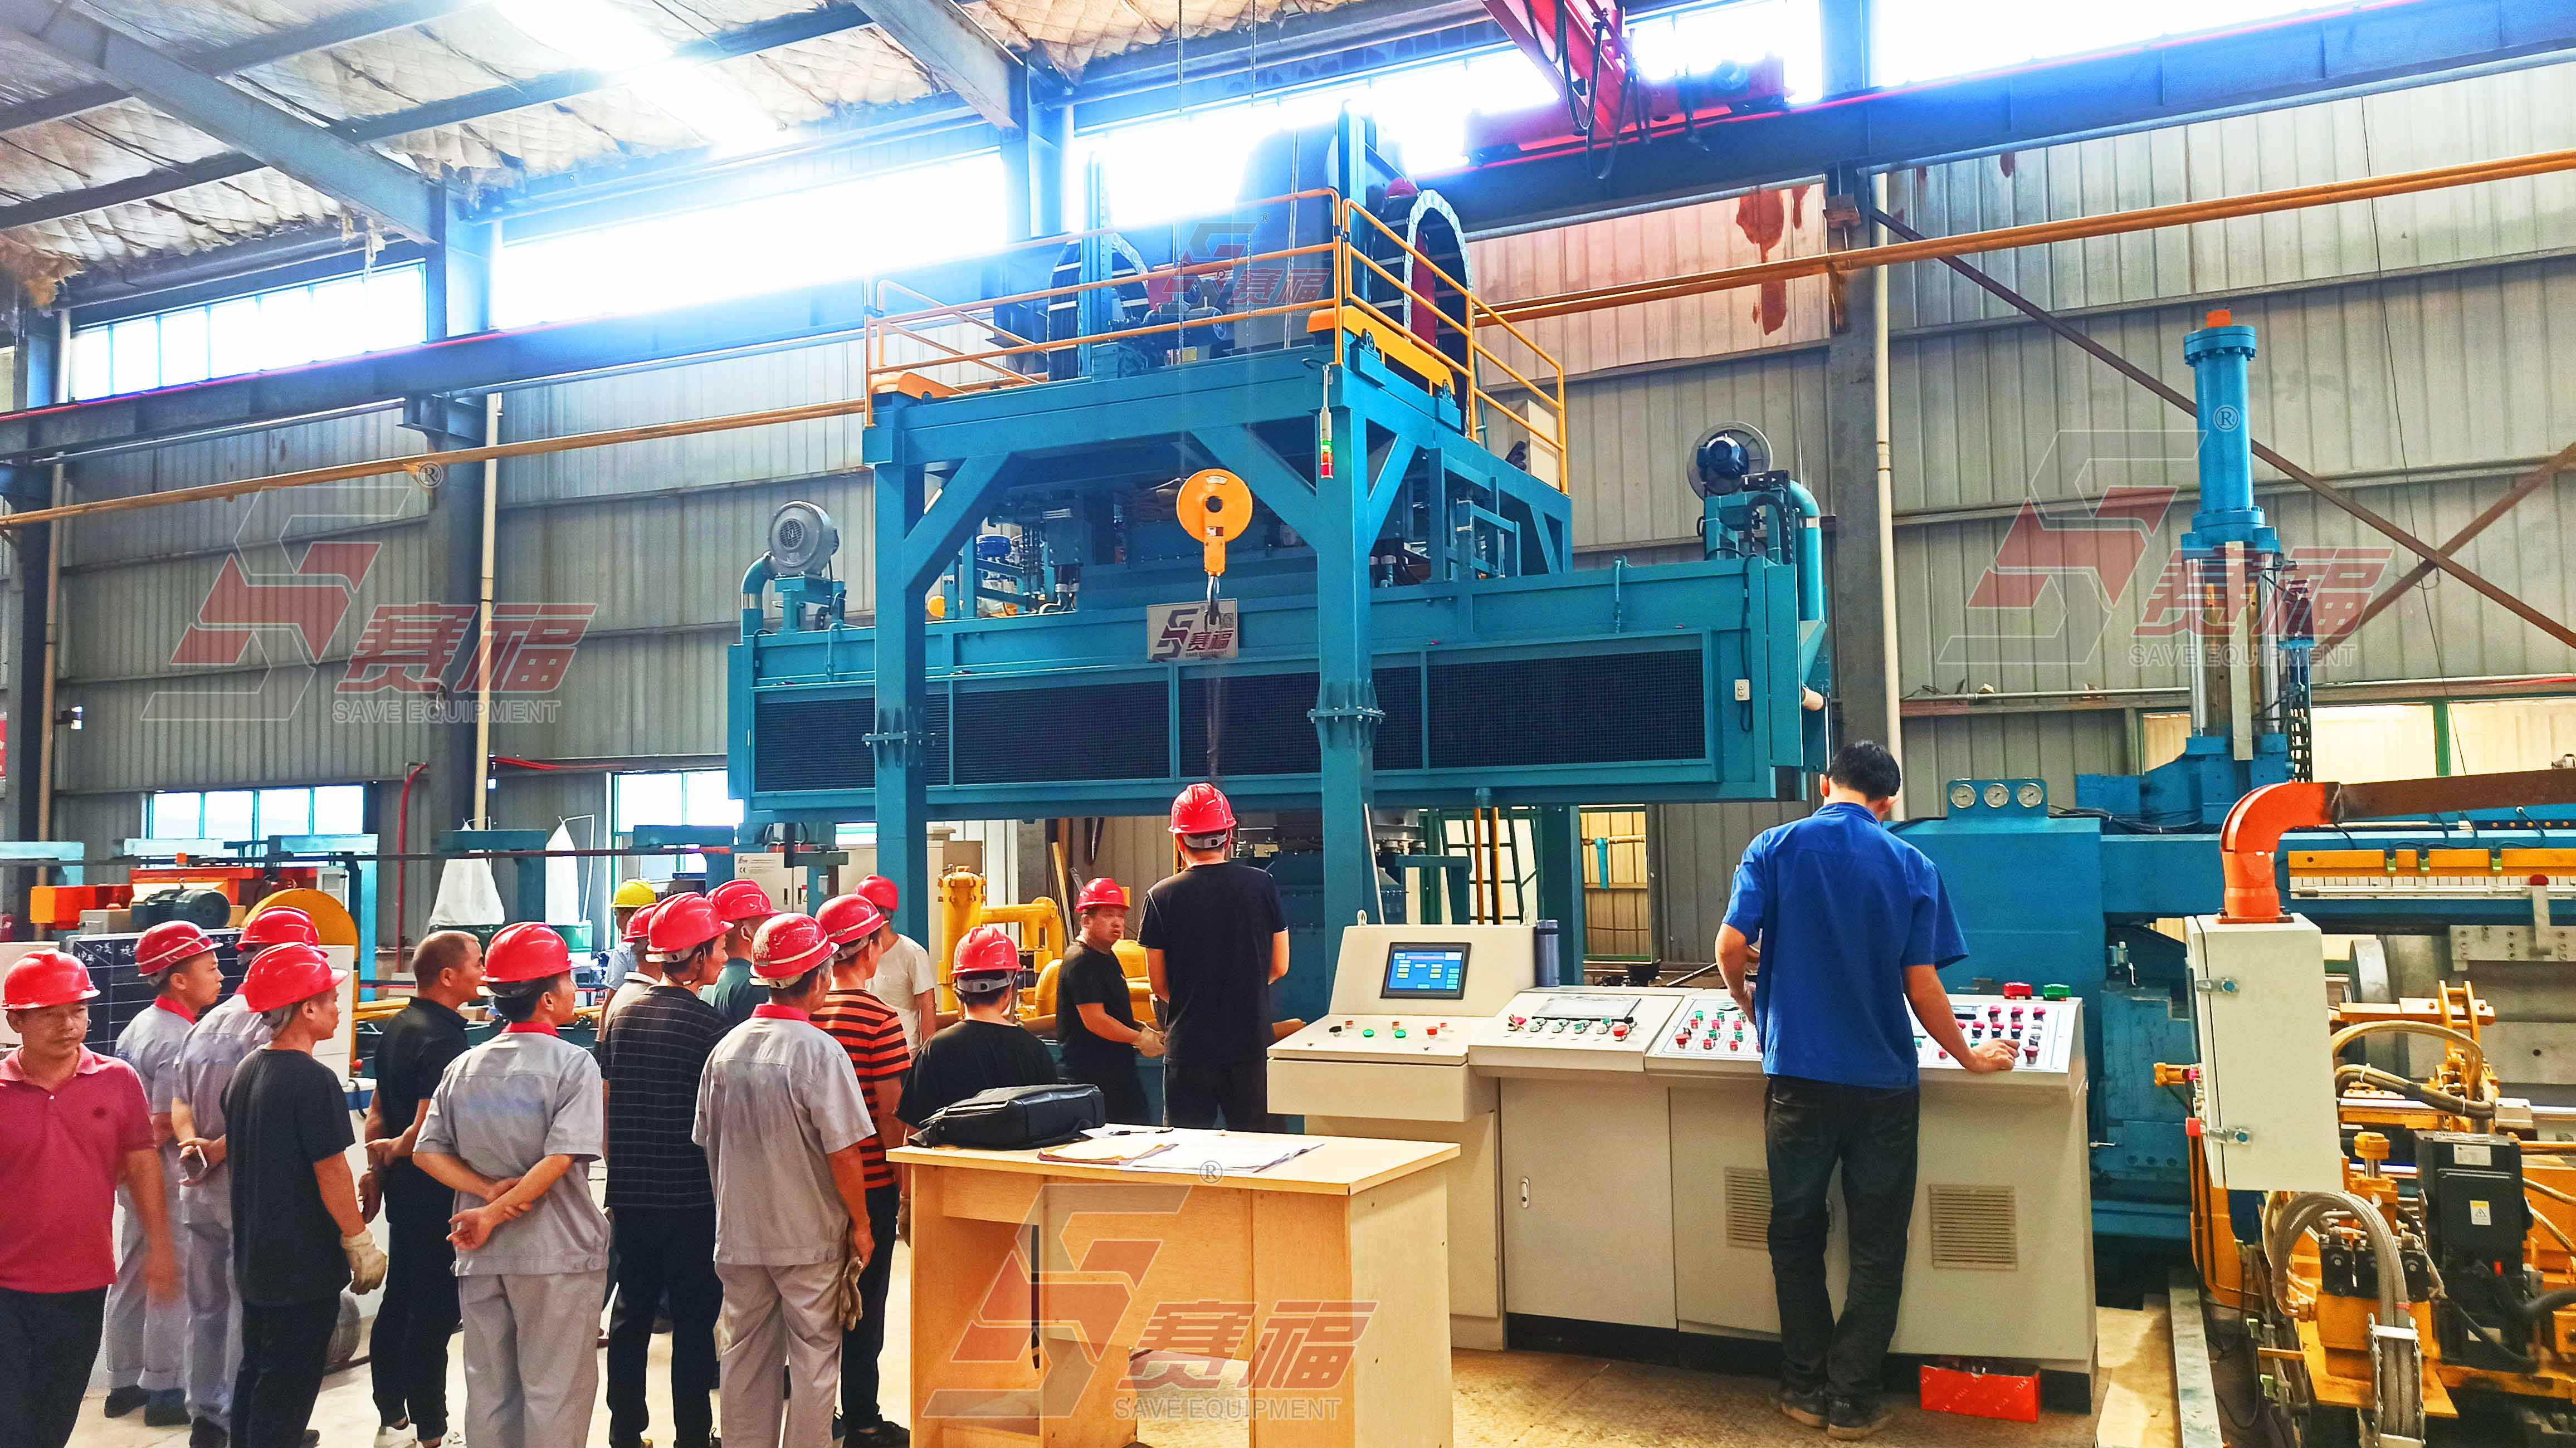 Shanxi Haifeng Aluminium ordered from us 3600-ton quick cooling quenching system.​